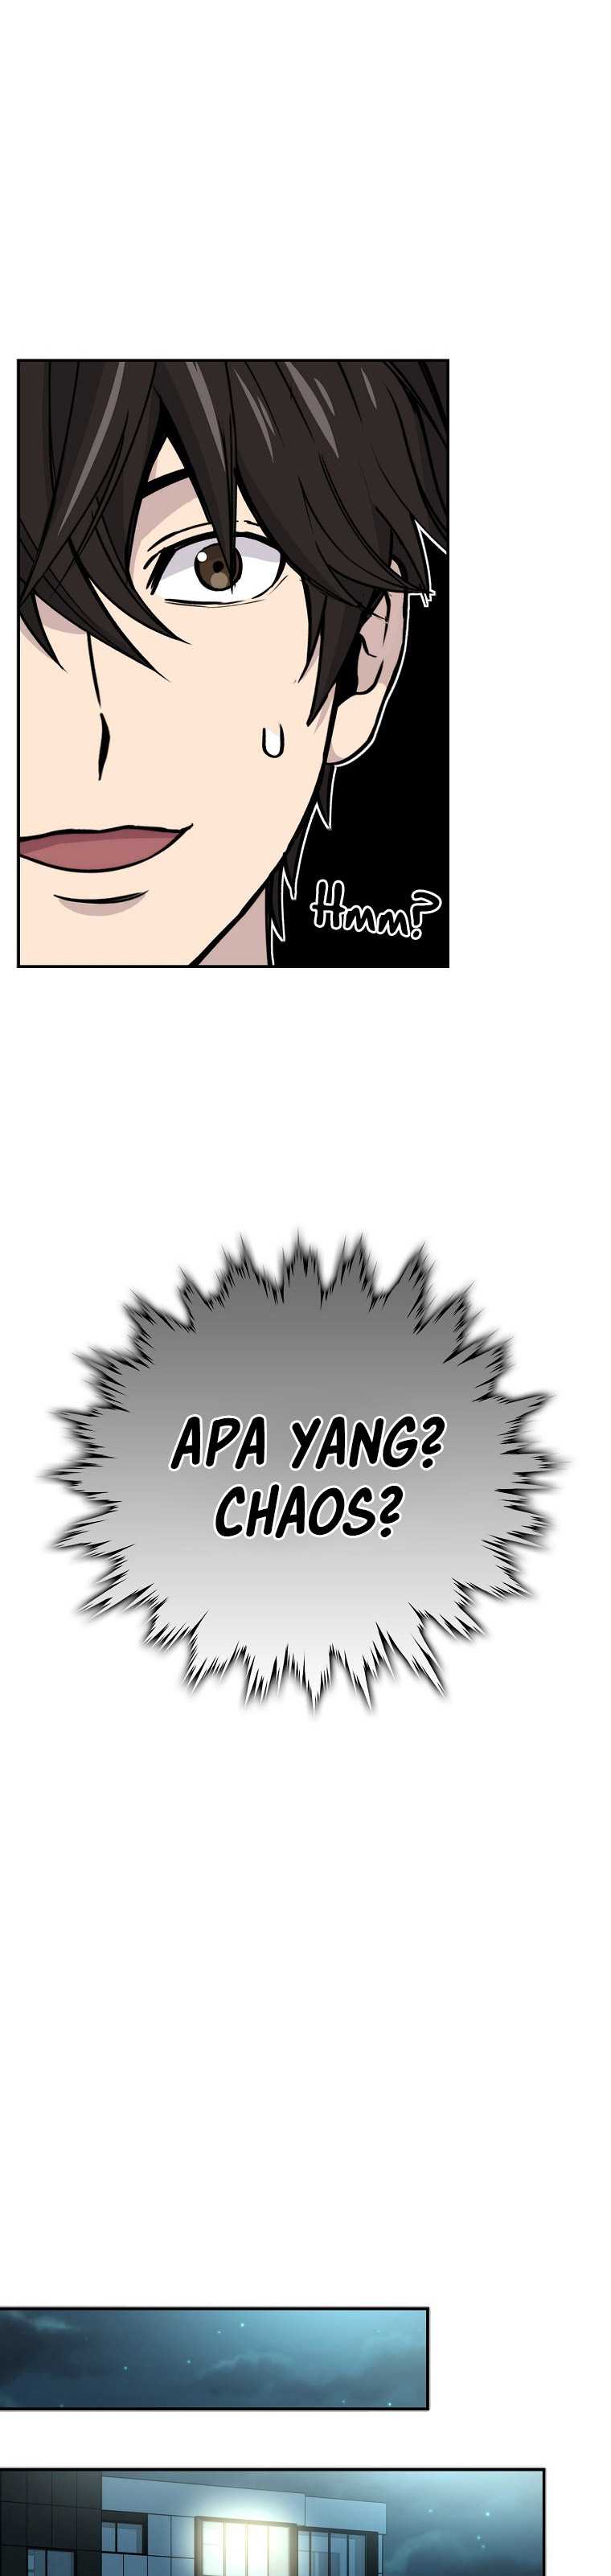 Demon Lord’s Martial Arts Ascension Chapter 03